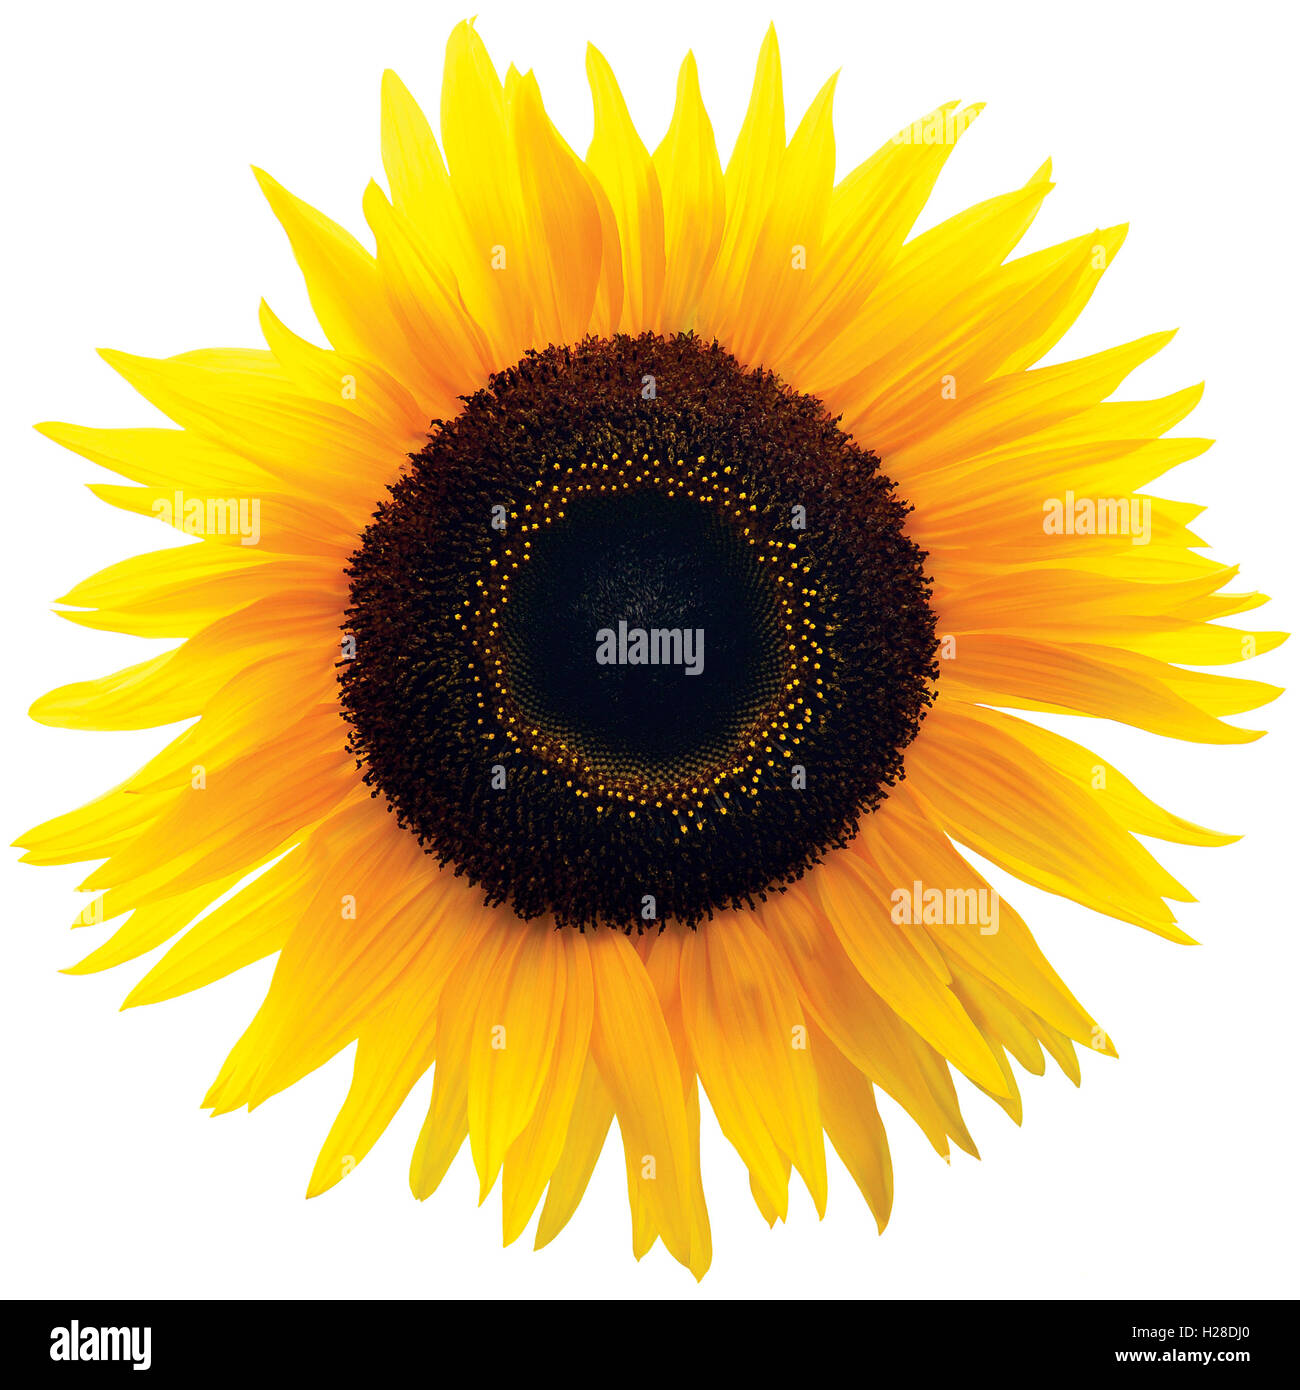 Common Sunflower Flower Head, Isolated Blooming Genus Helianthus H. Annuus, Large Bright Colorful Detailed Macro Closeup Vibrant Stock Photo